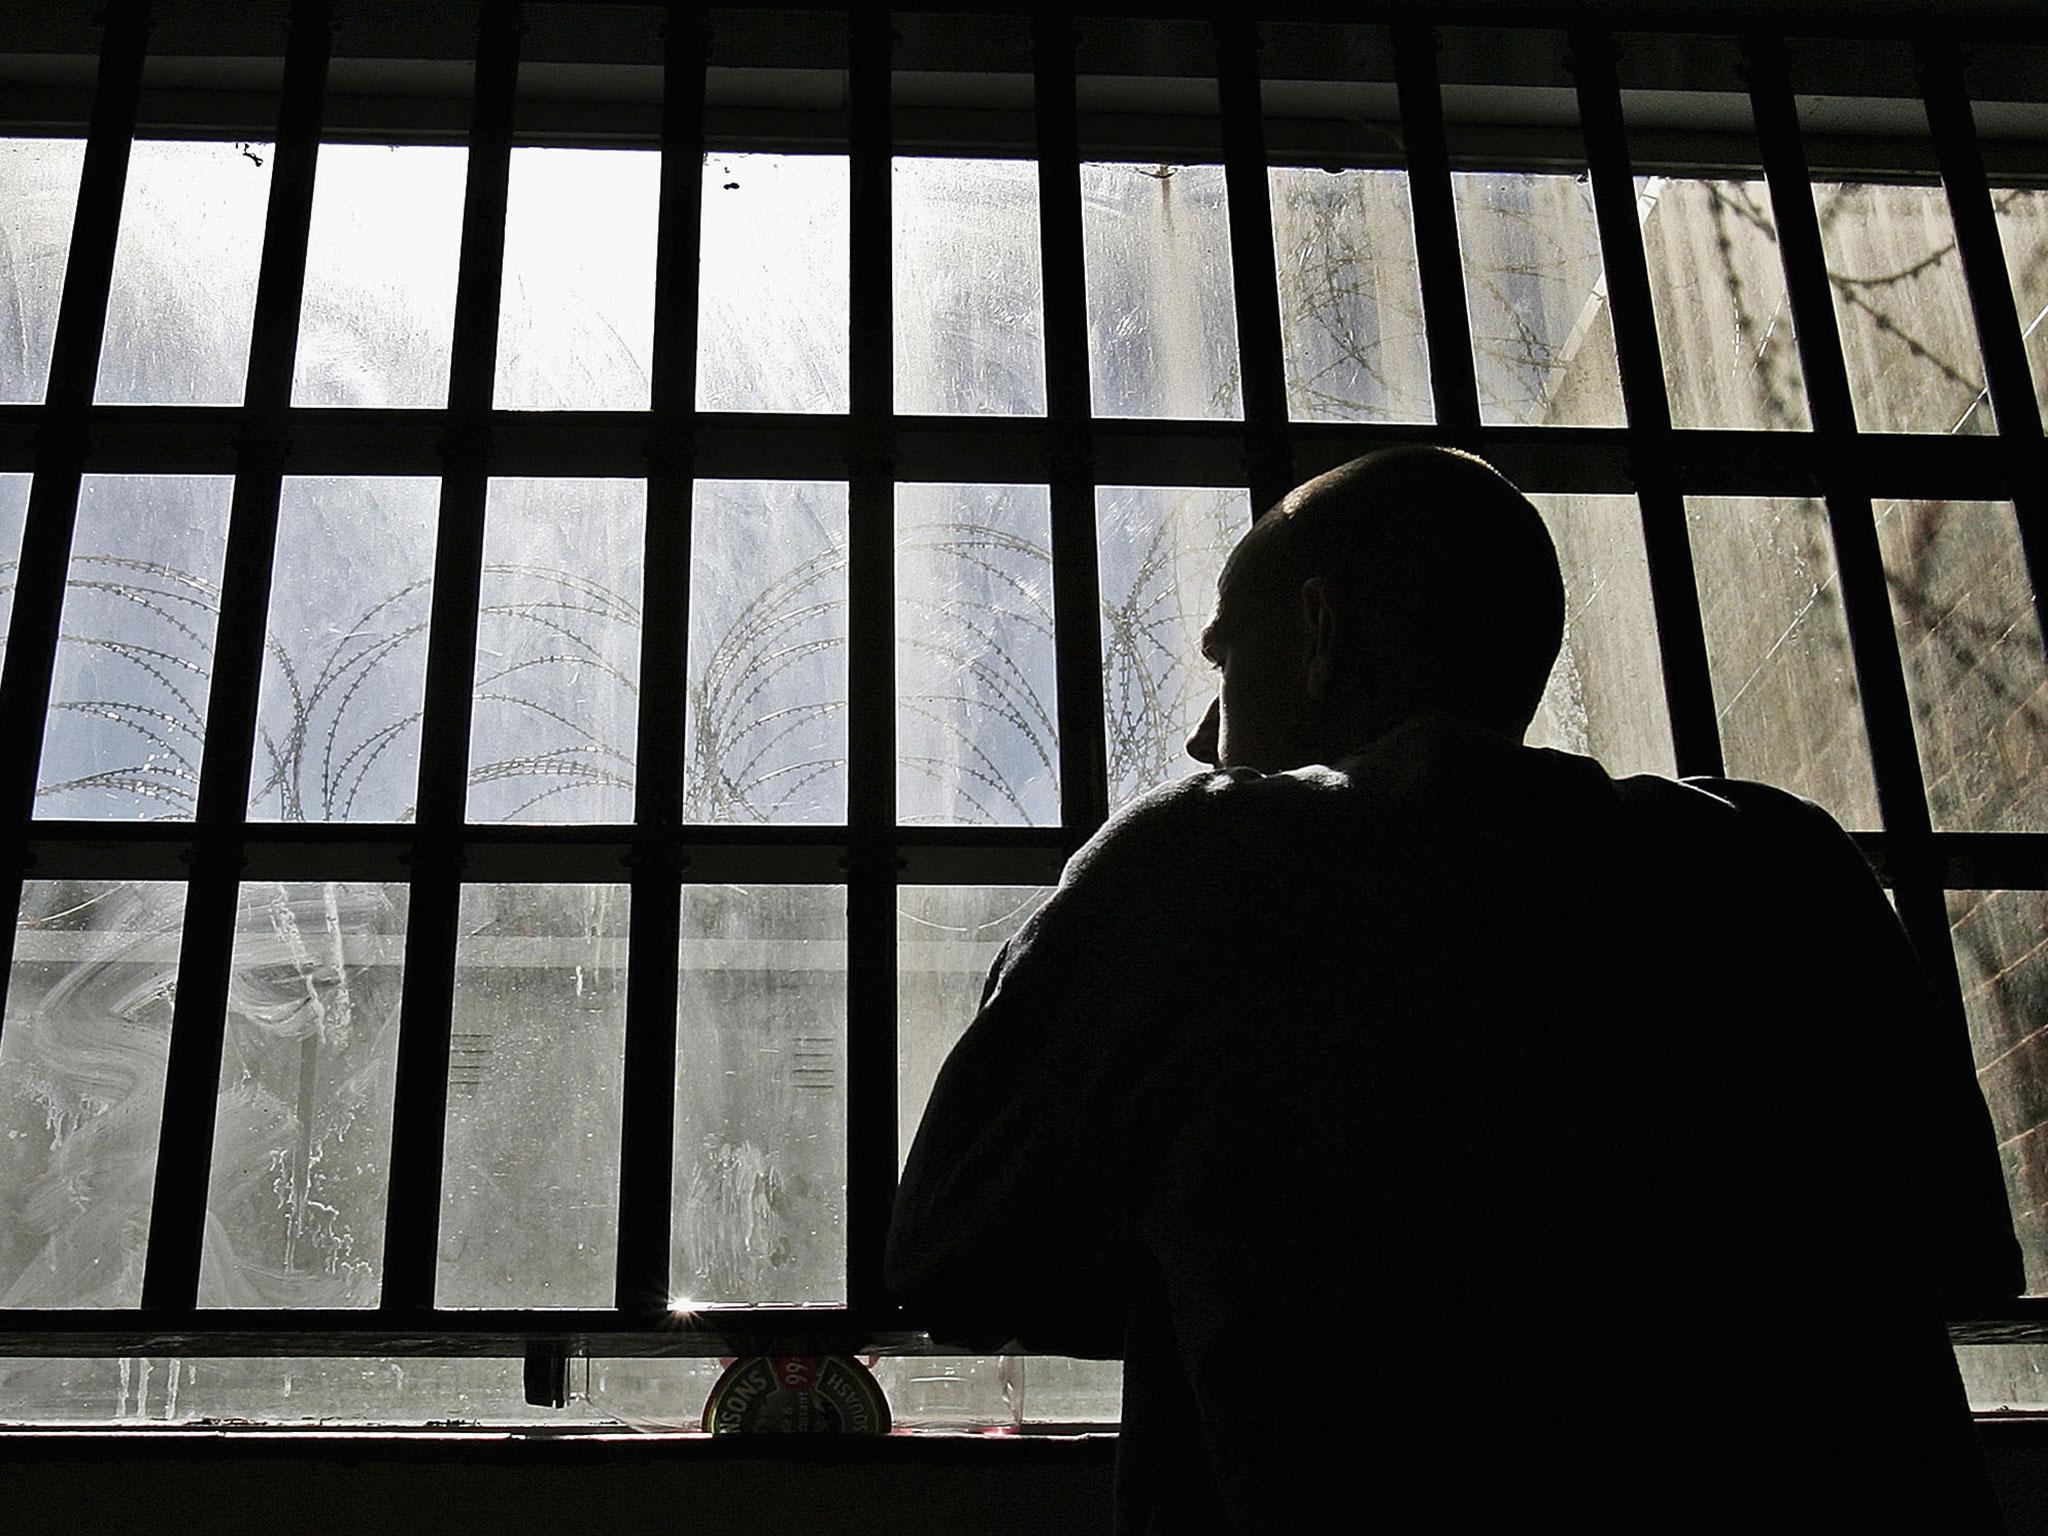 The PPO said that 70 per cent of self-inflicted deaths were prisoners with mental health needs between 2012 and 2014